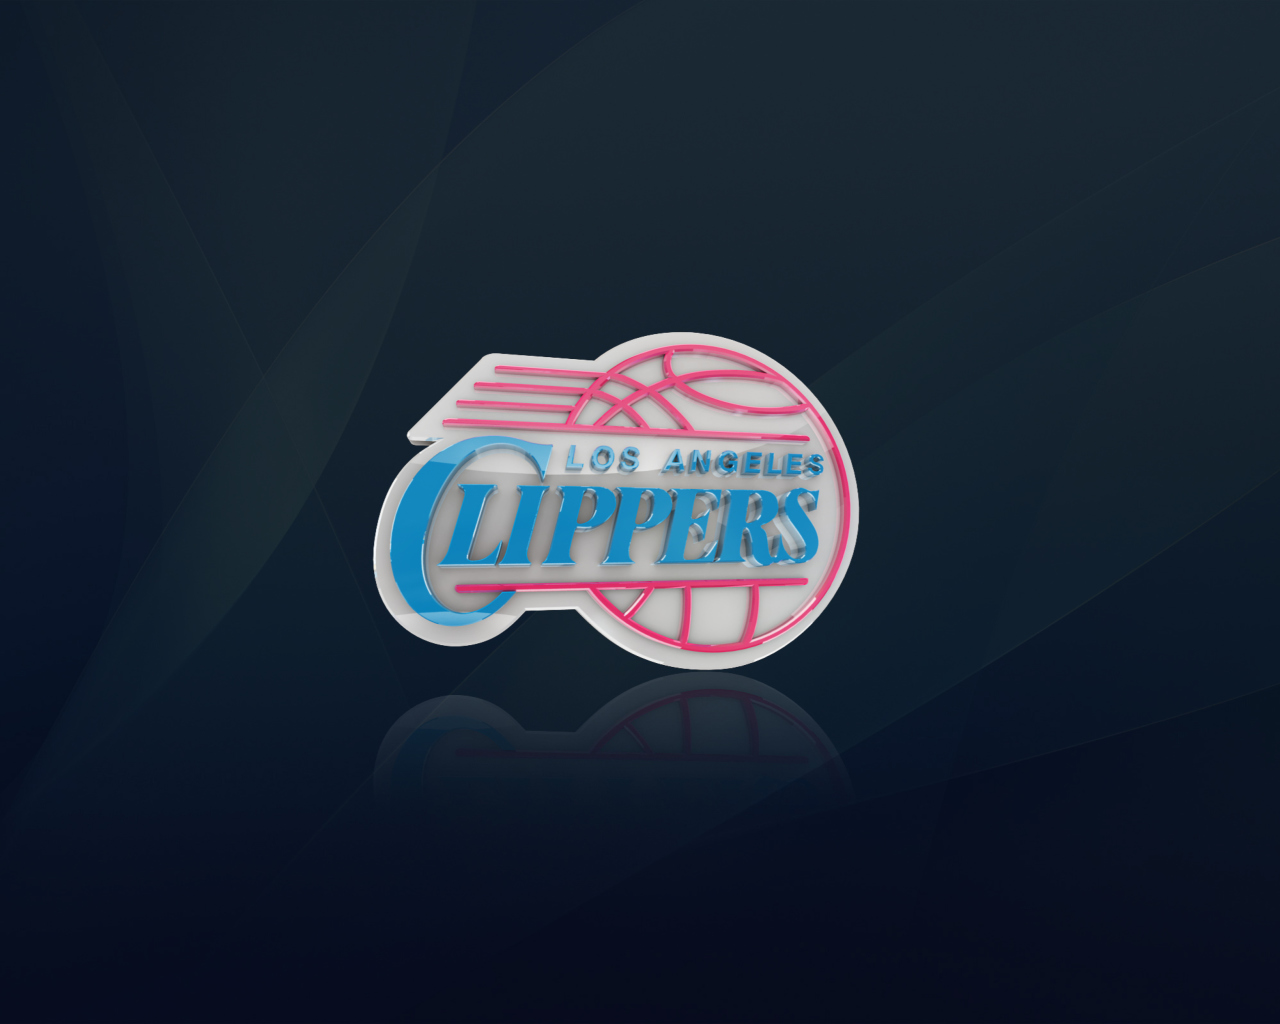 Los Angeles Clippers wallpaper 1280x1024